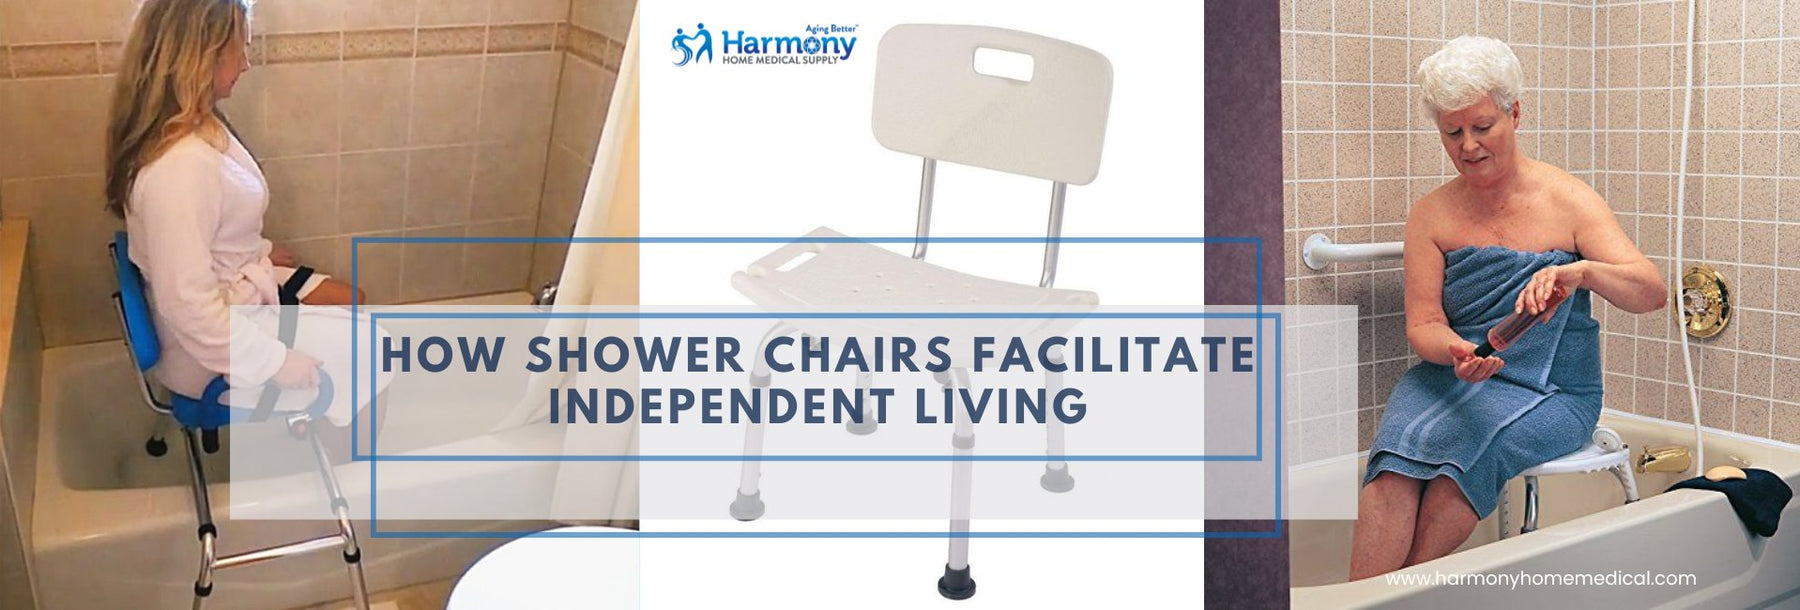 How Shower Chairs Facilitate Independent Living - Harmony Home Medical Supply